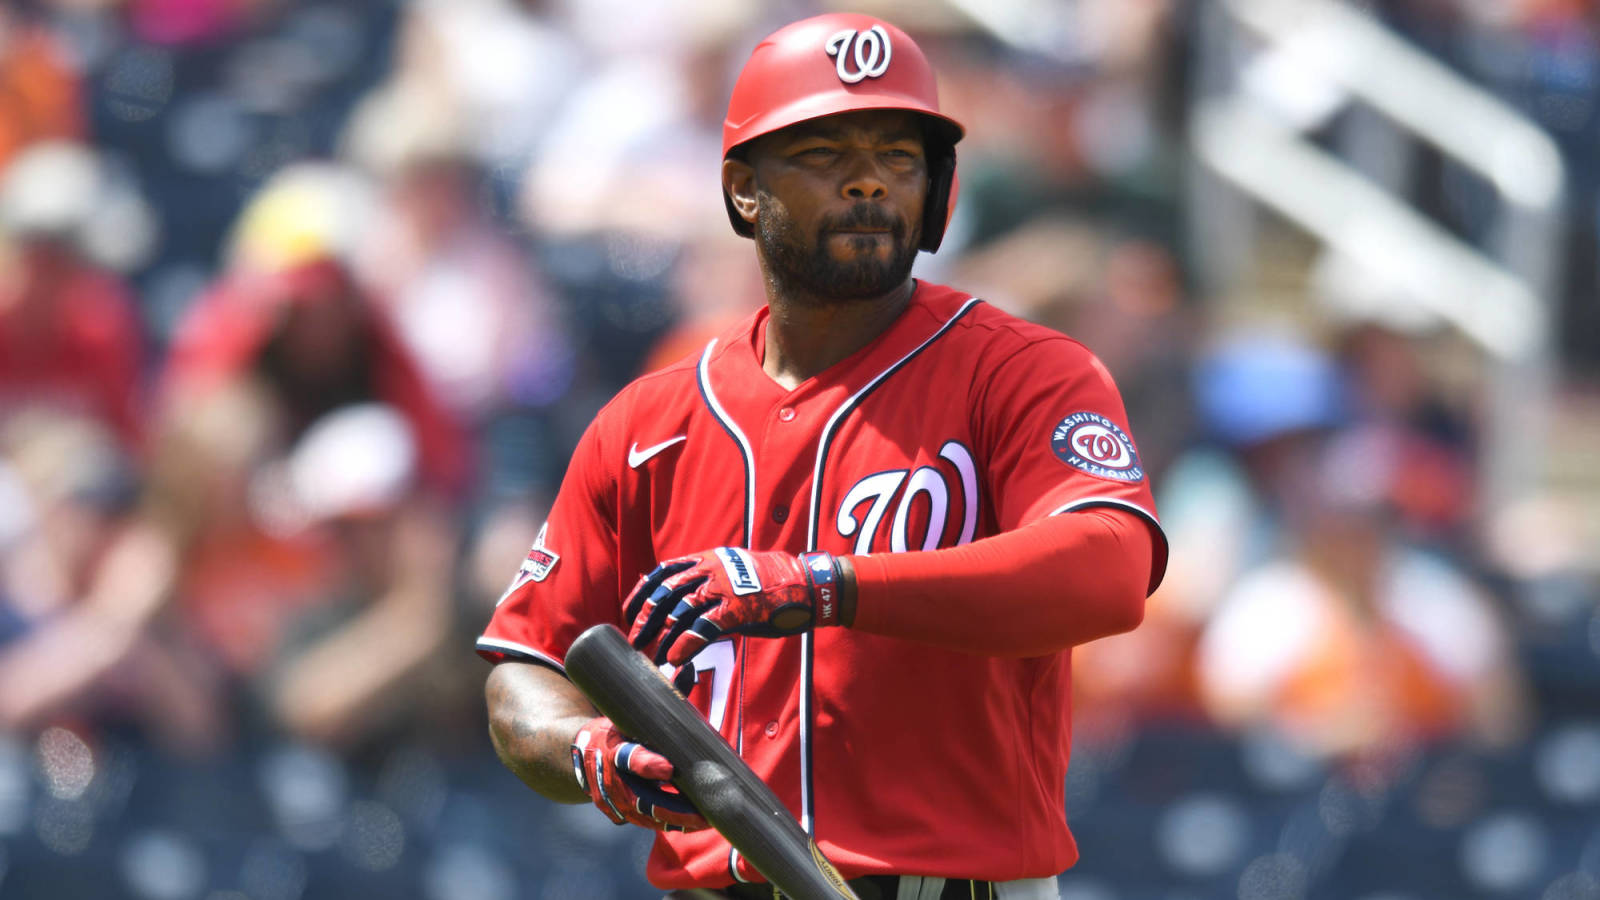 Howie Kendrick announces retirement from baseball after 15 seasons